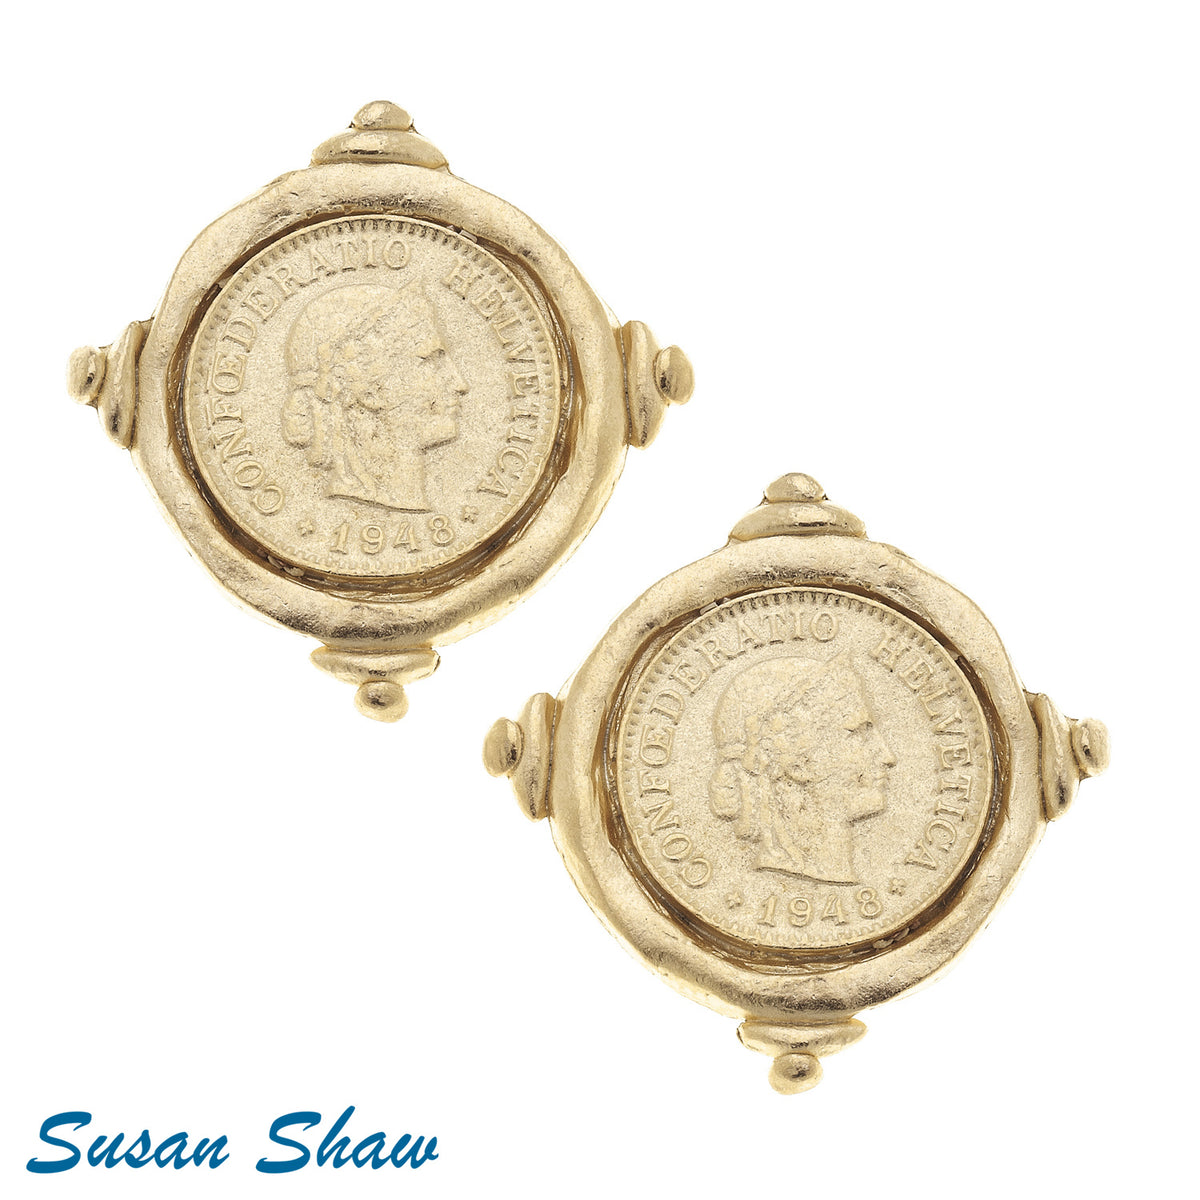 SUSAN SHAW COIN INTAGLIO CLIP ON EARRINGS